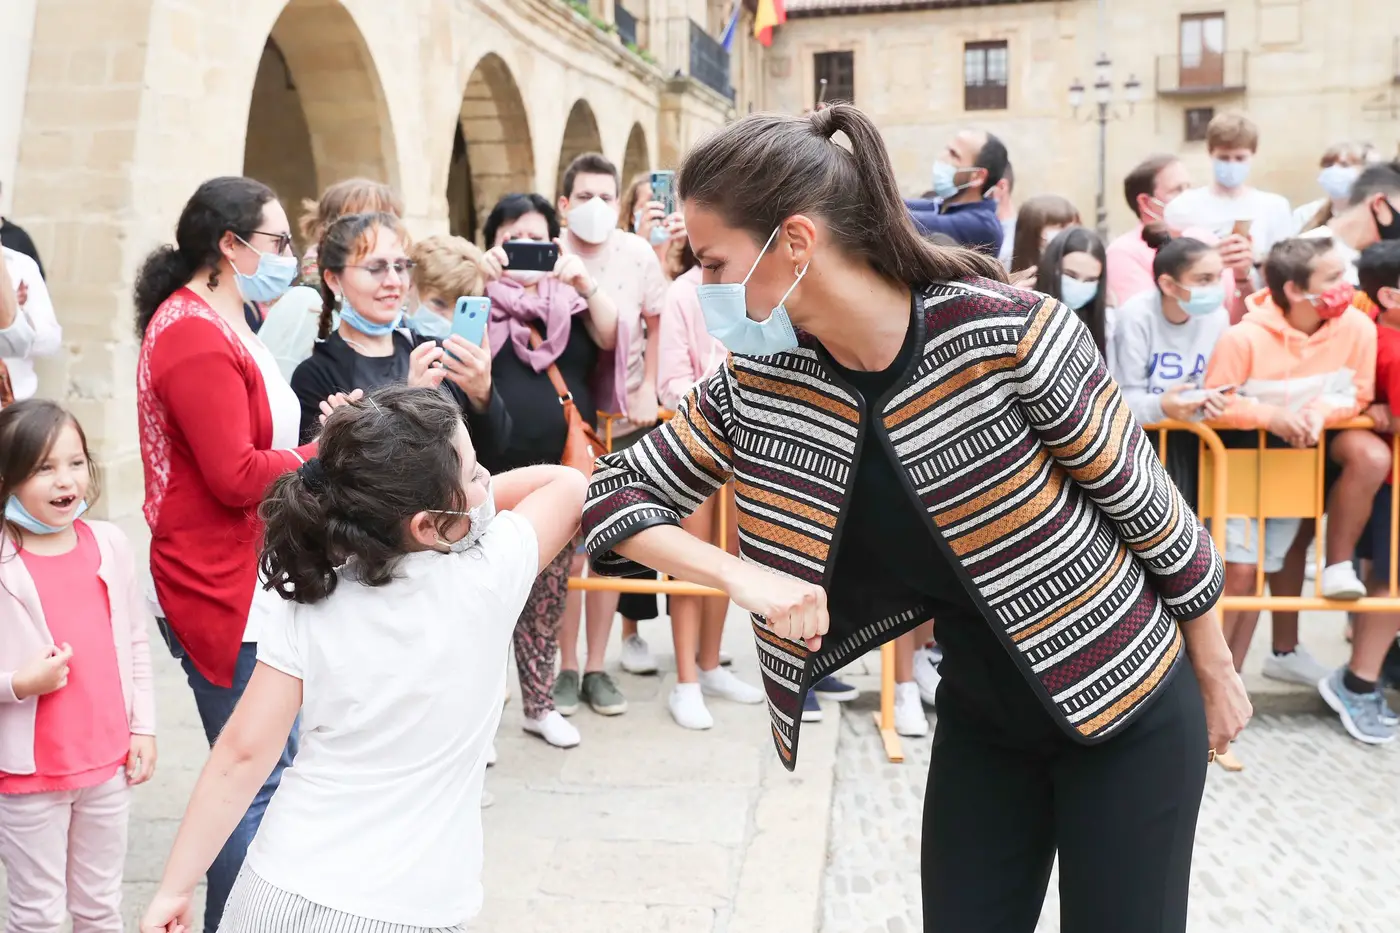 Queen Letizia saying hellow to young kids